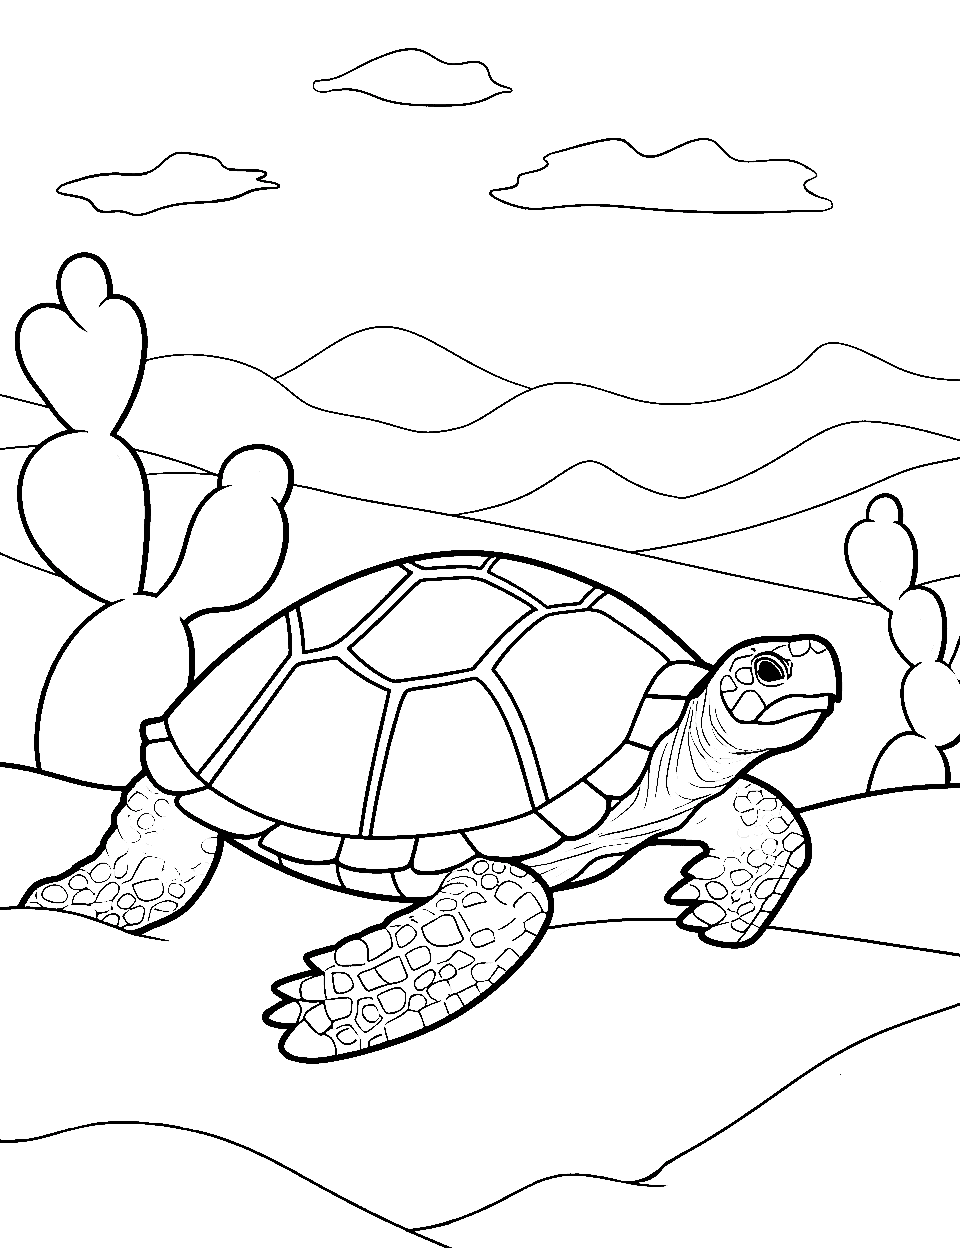 Desert Roaming Tortoise Turtle Coloring Page - A tortoise with cacti in the background, navigating the desert.